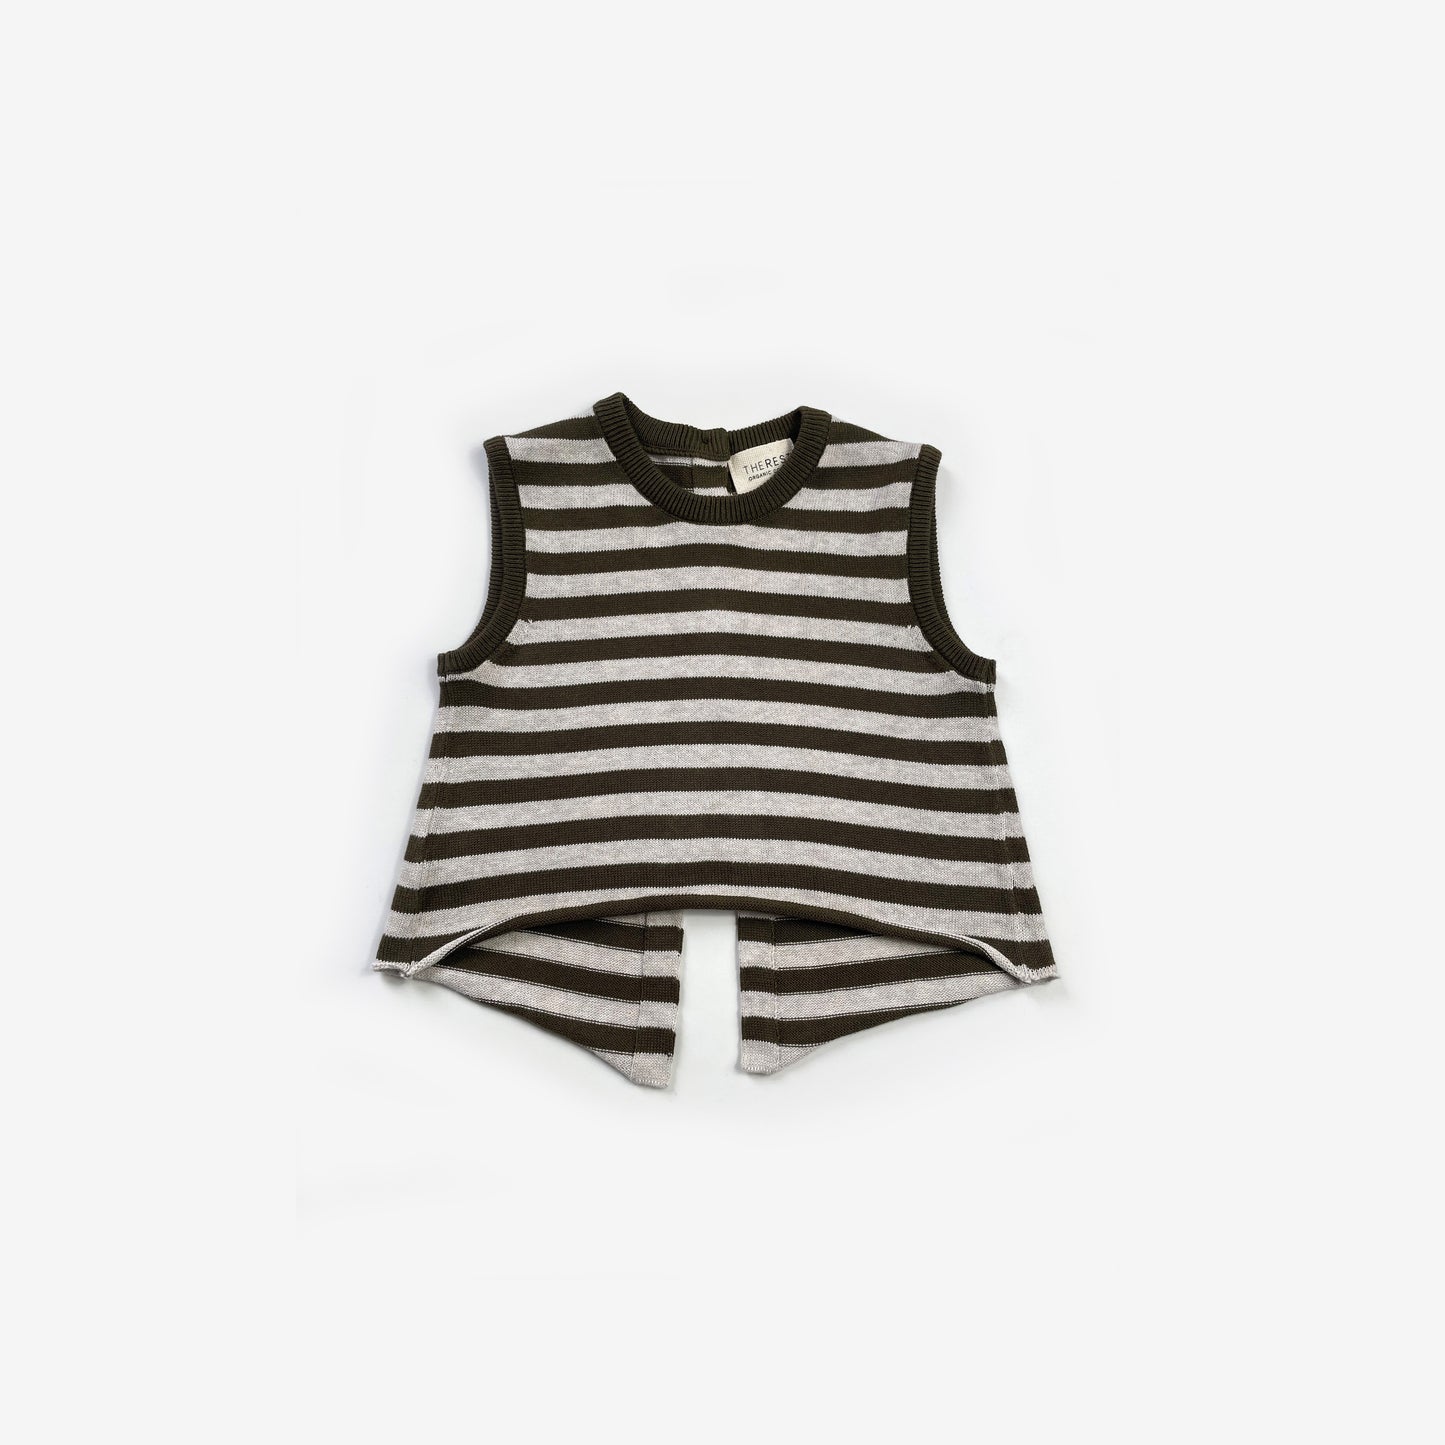 Reverse Button Up Top - Olive Stripe